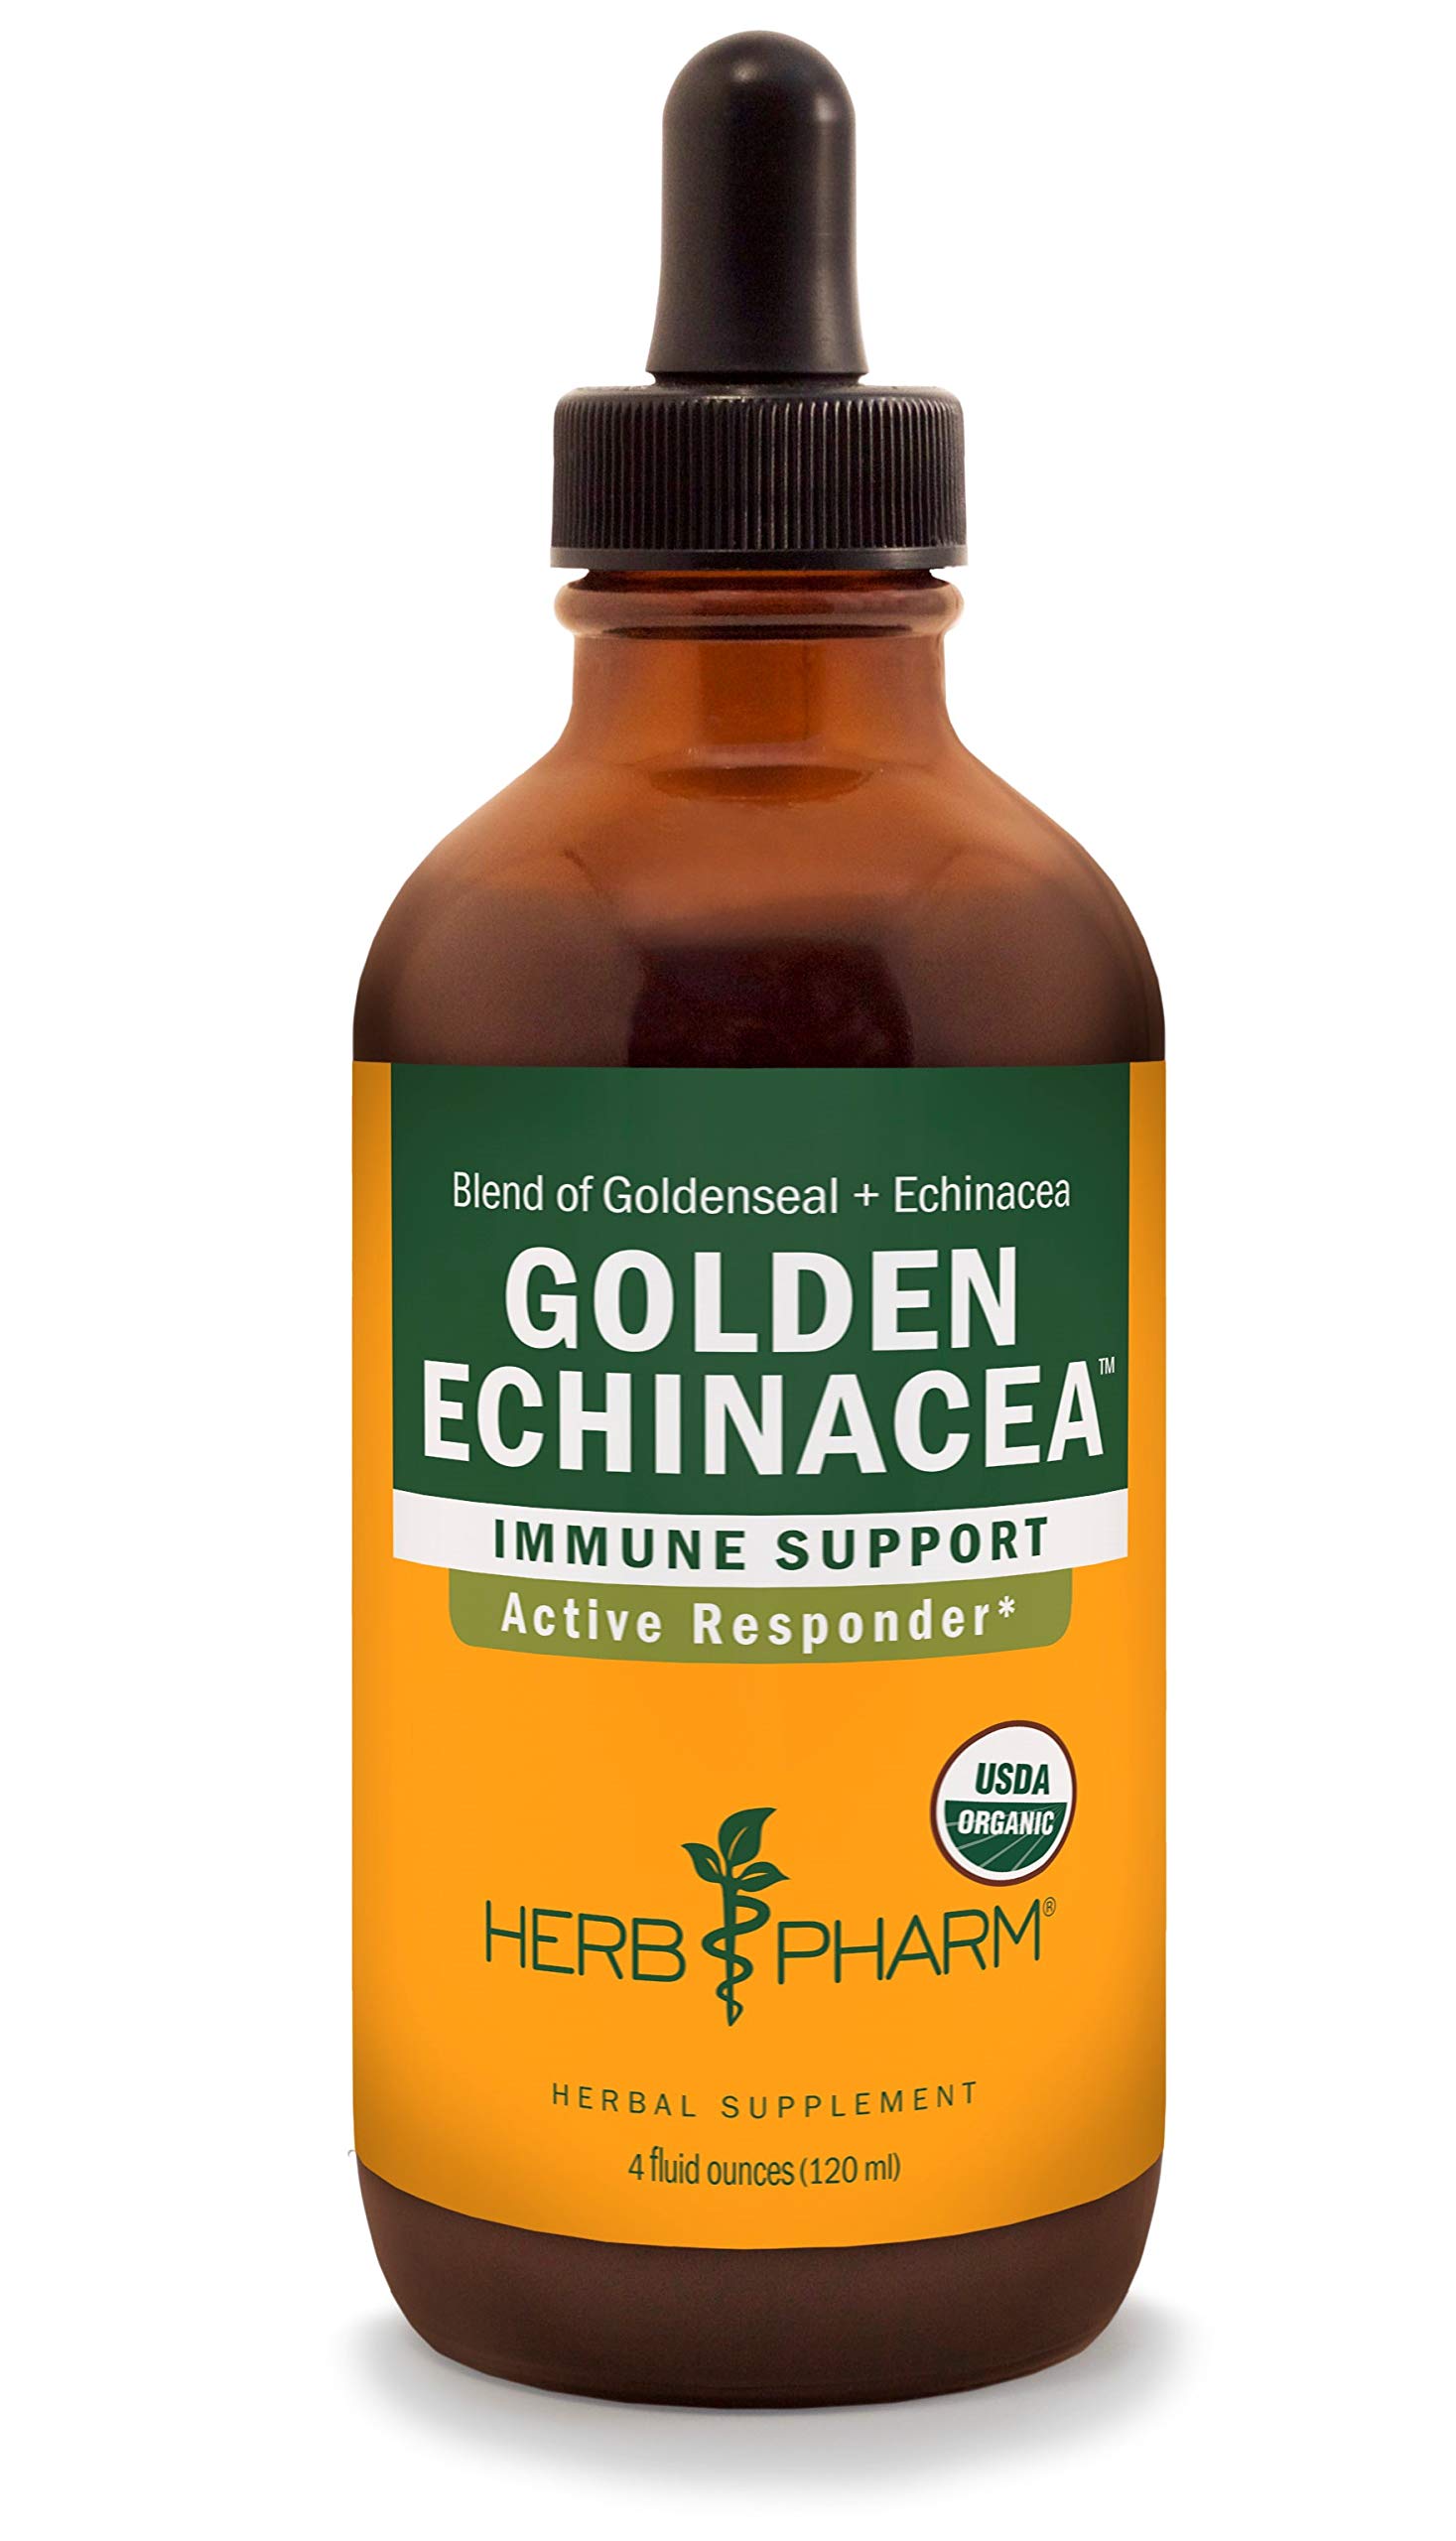 Herb Pharm Certified Organic Golden Echinacea Liquid Extract for Immune System Support - 4 Ounce